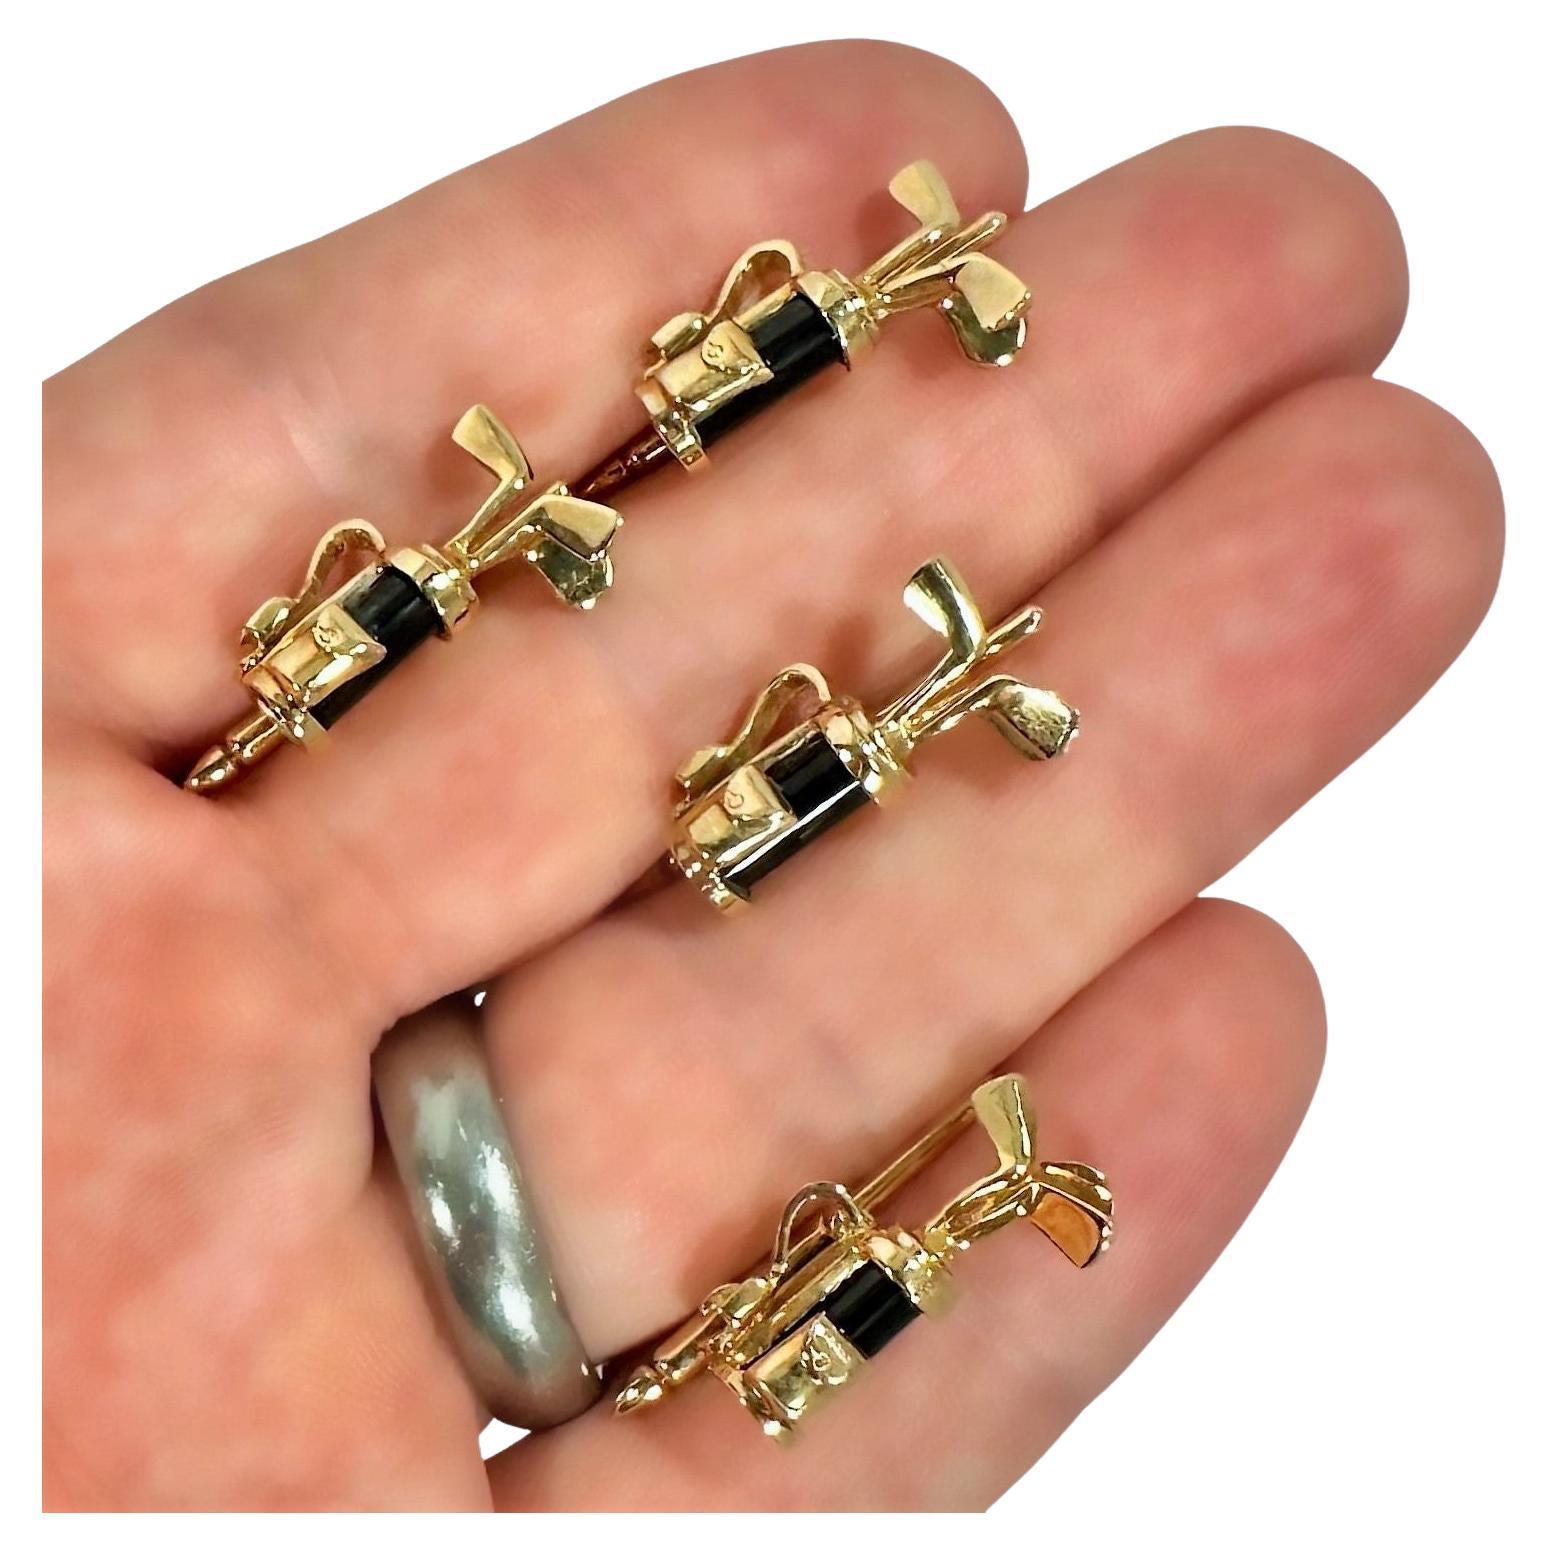 Men's Finely Crafted 14k Yellow Gold and Onyx Golf Bag Formal Dress Set With 4 Buttons